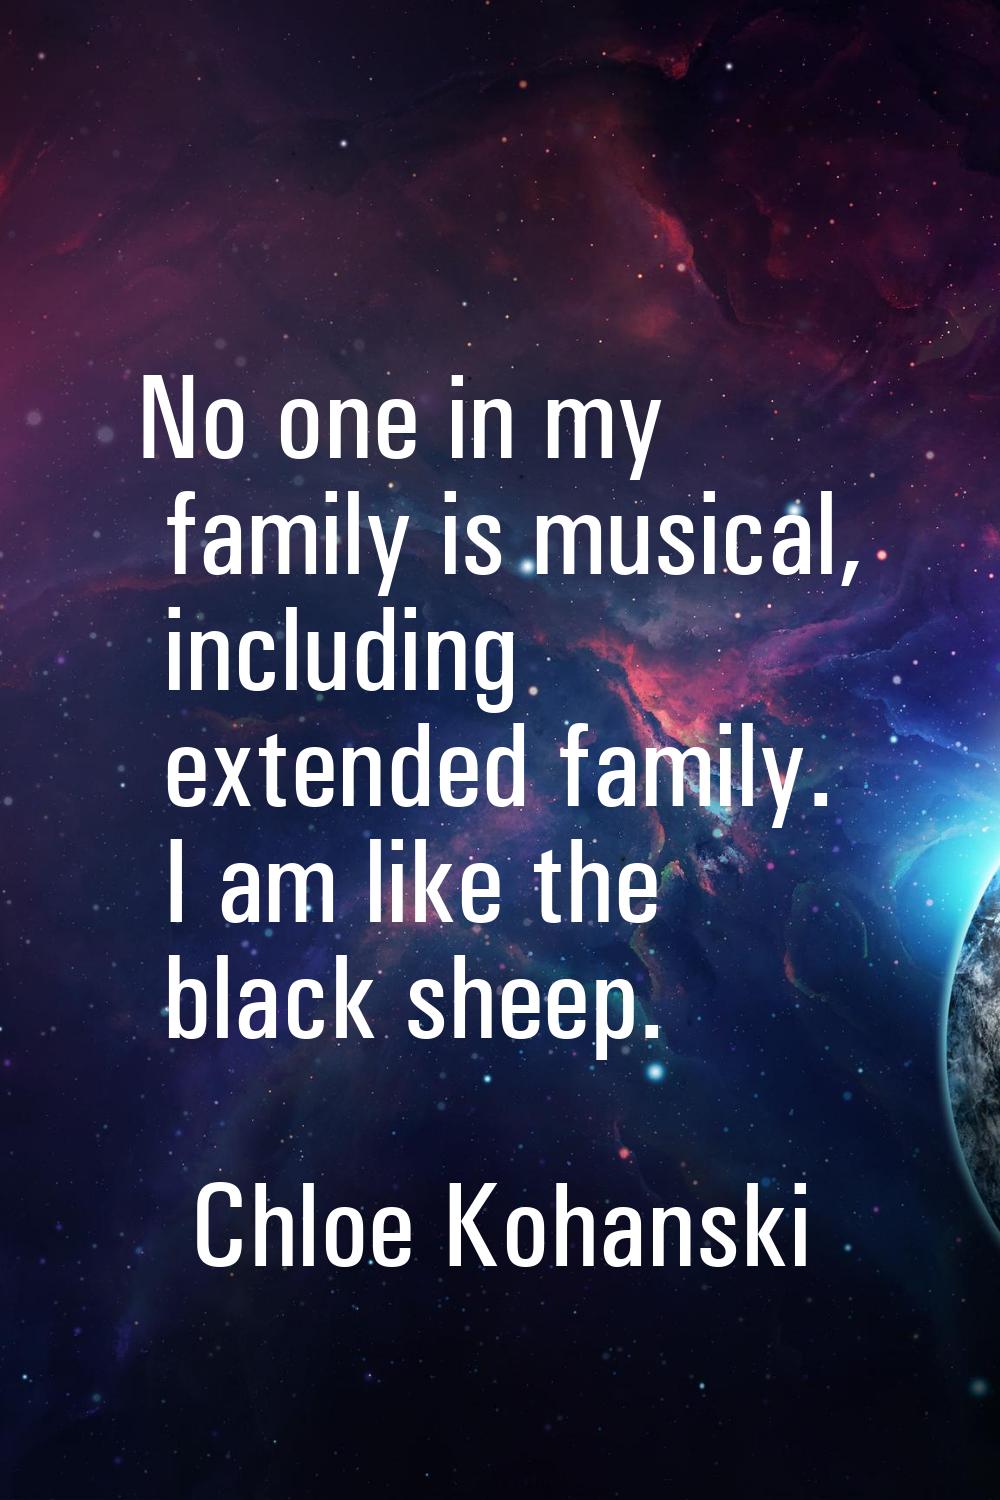 No one in my family is musical, including extended family. I am like the black sheep.